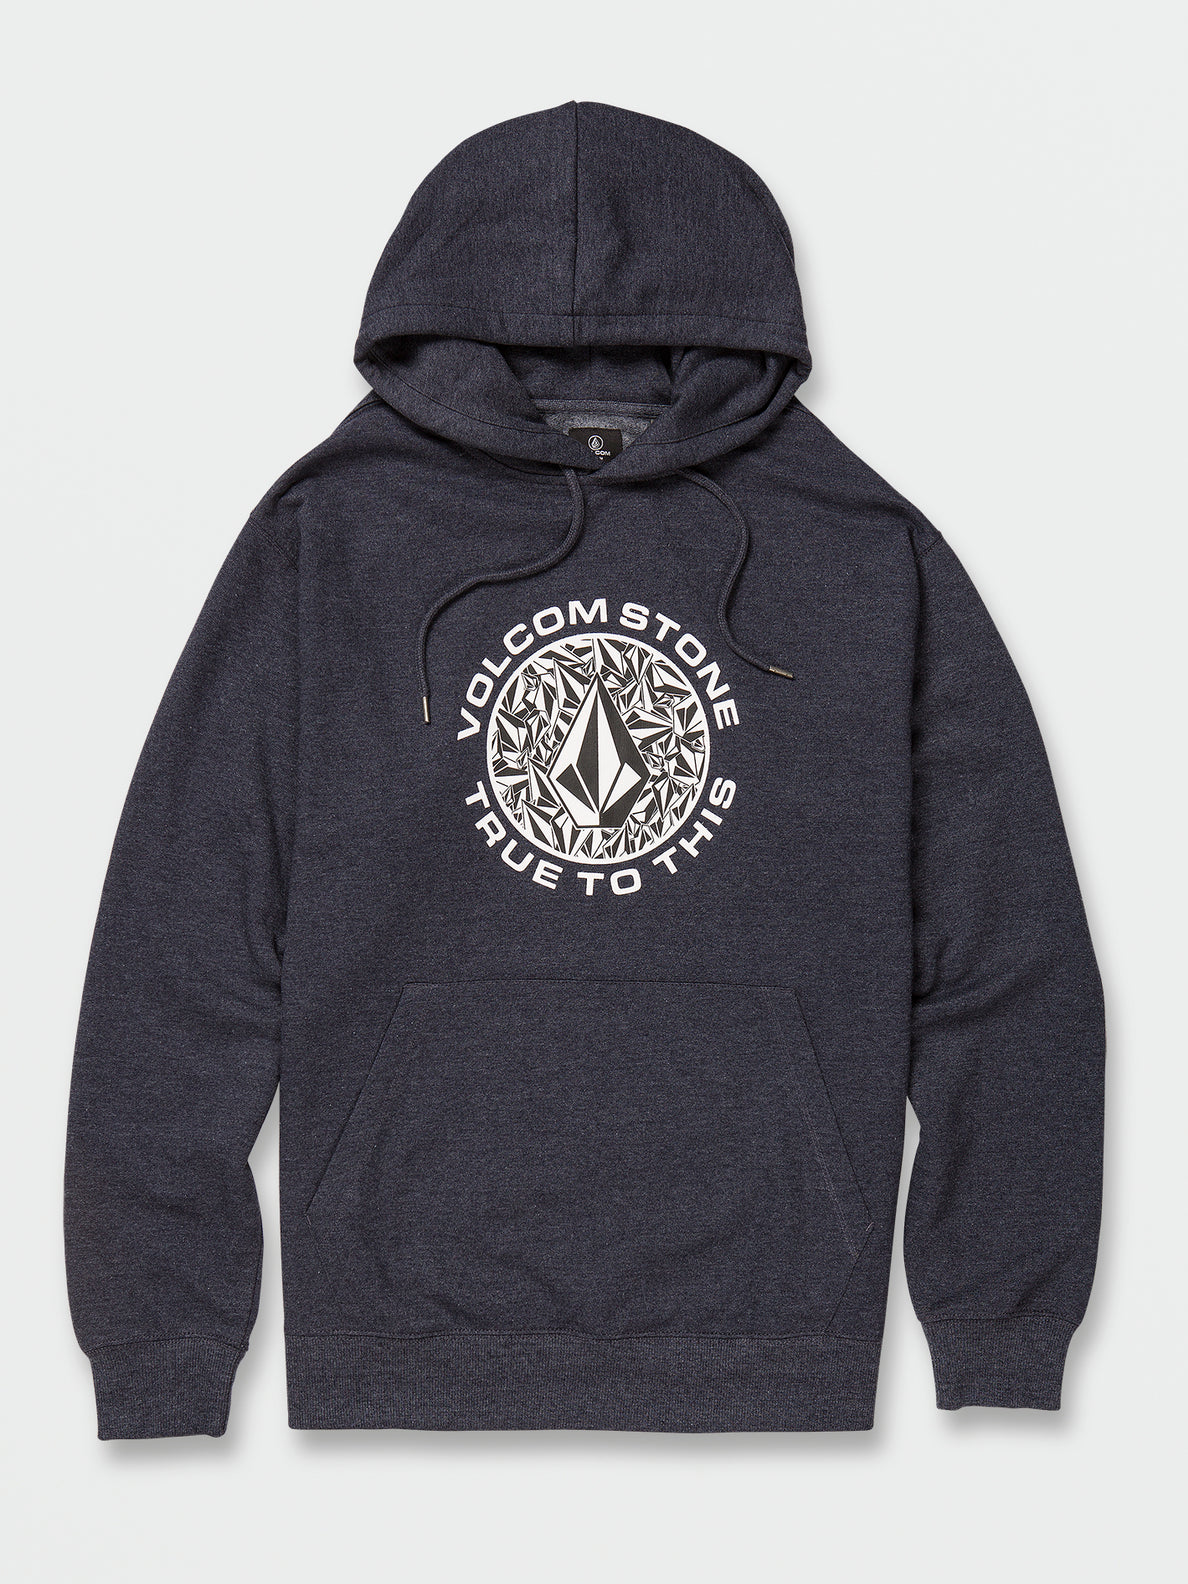 Black Friday Pullover Hoodie - Navy Heather (A4142203_NVH) [F]